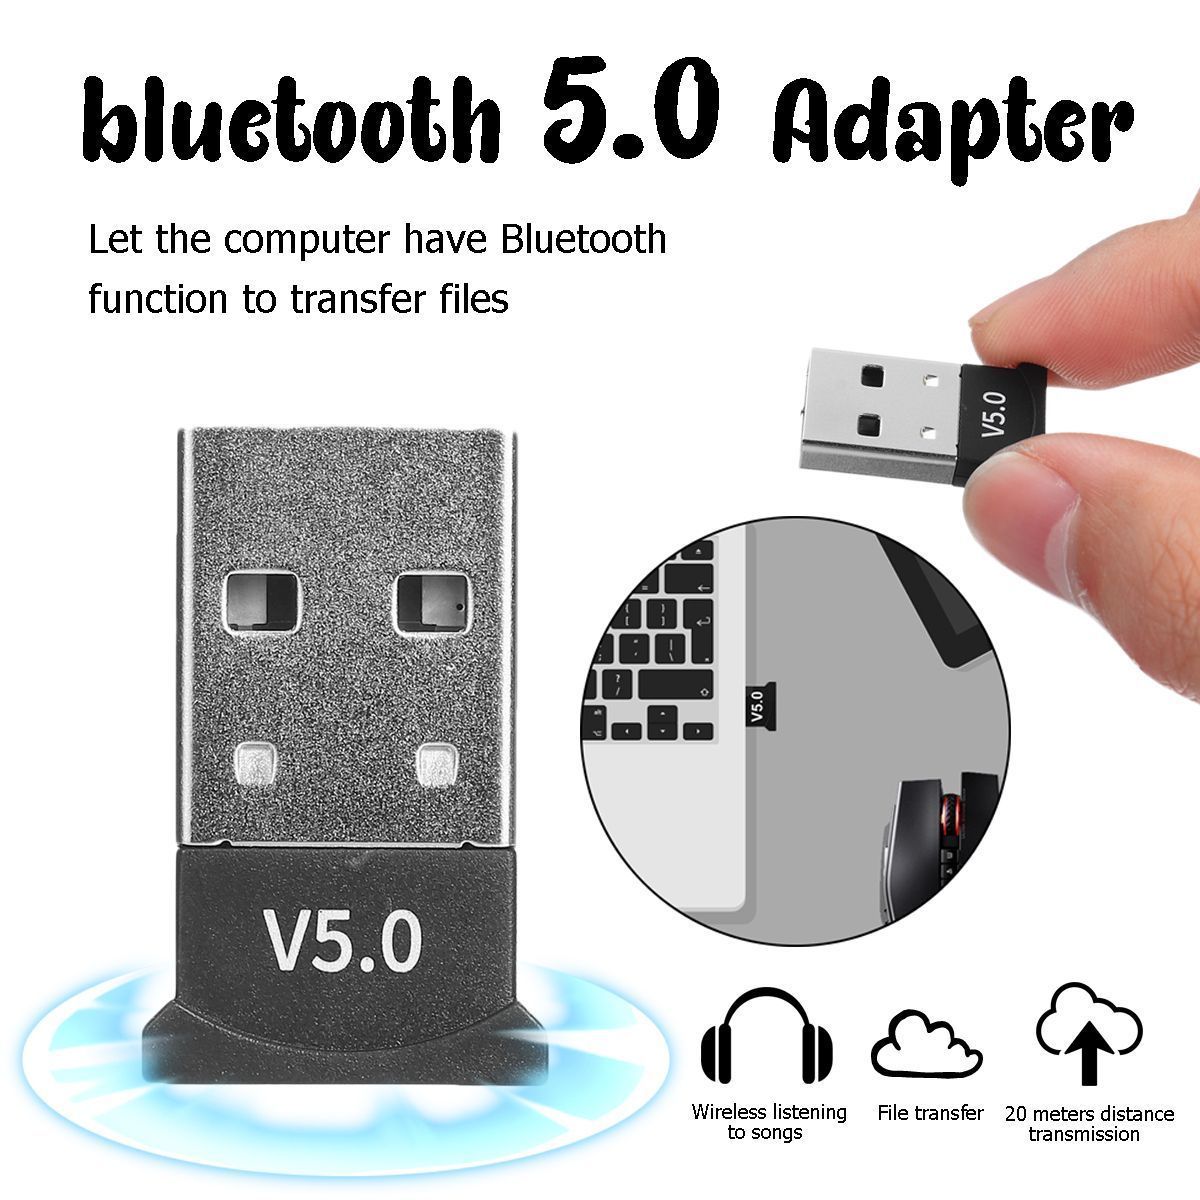 bluetooth-50-USB-Adapter-for-Window-7810-for-Vista-XP-for-Mac-OS-X-PC-Keyboard-Mouse-Gamepads-Speake-1534187